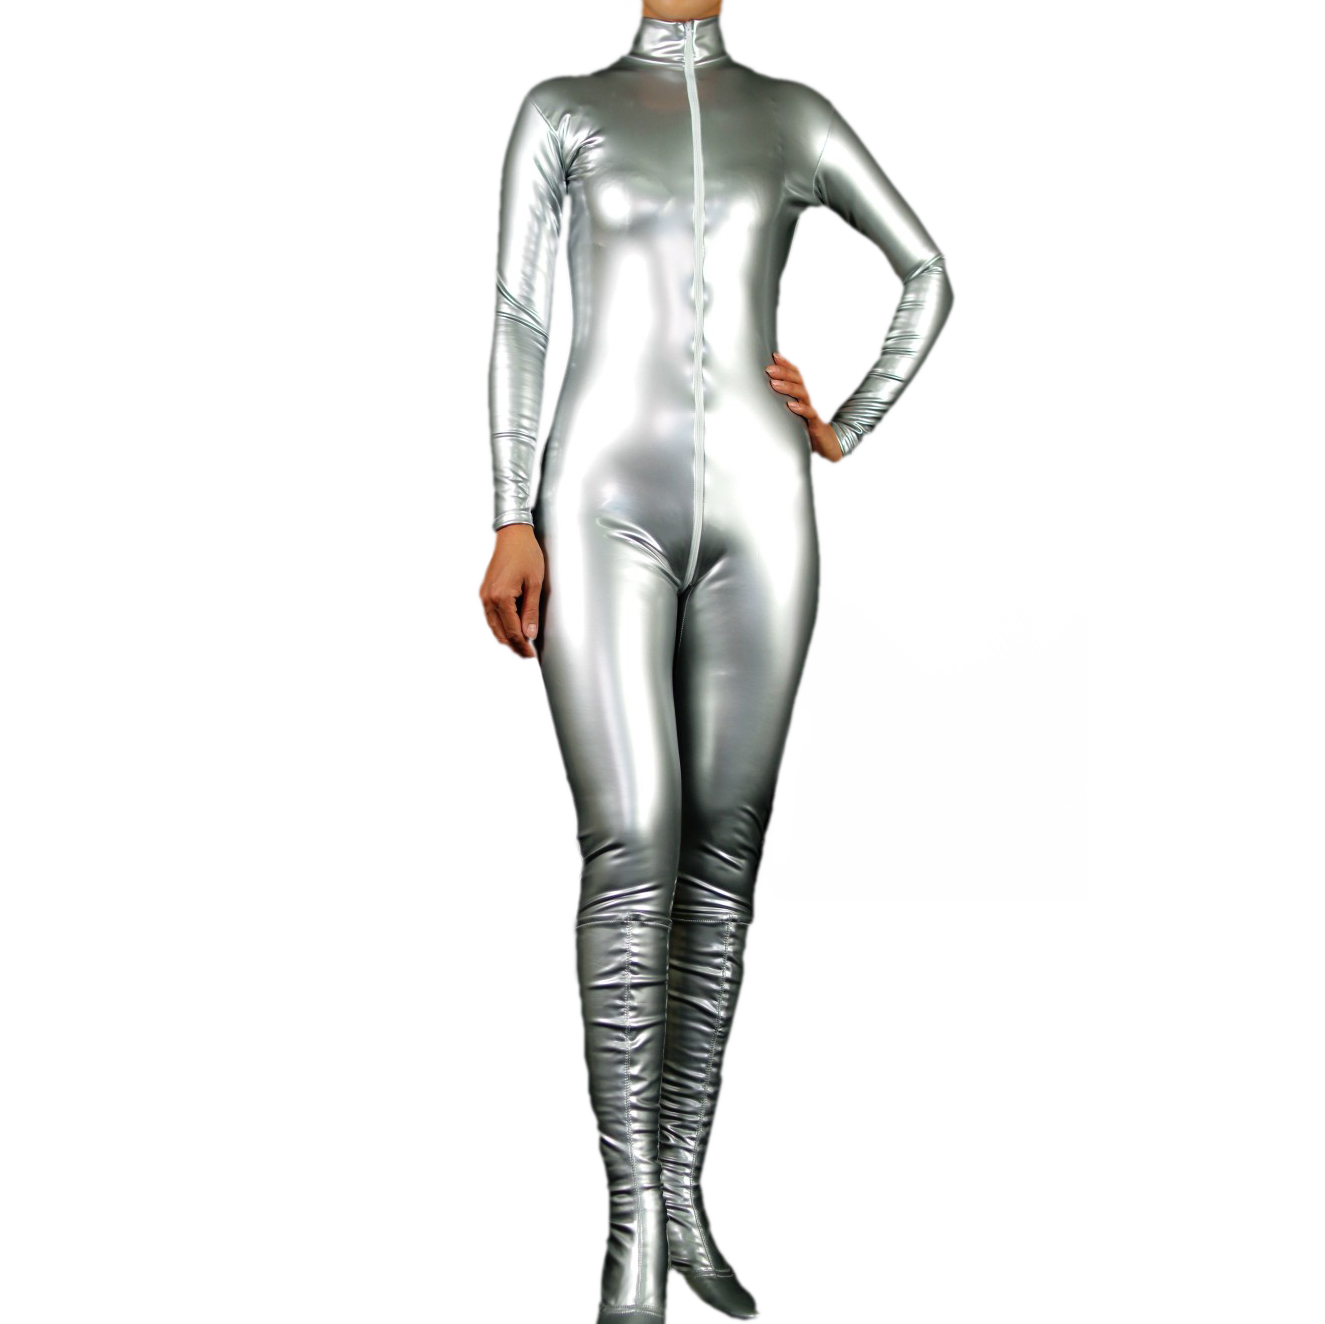 Women's Jumpsuit-styled Silver PVC Front Zipper Catsuit (M39) - Click Image to Close